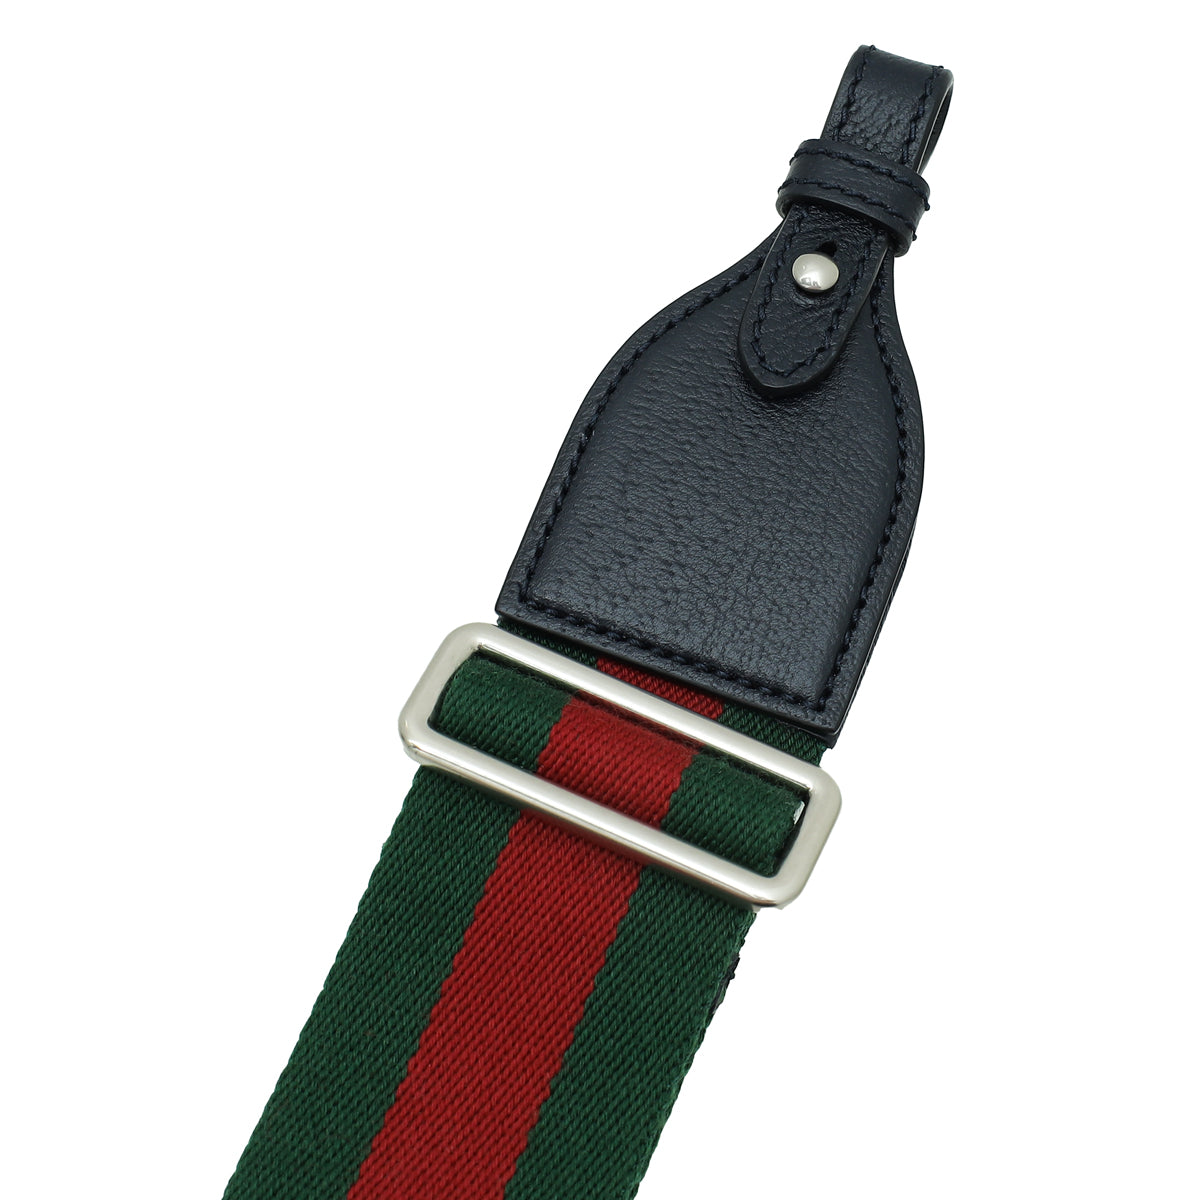 Wide studded 'Gucci' Web shoulder strap in green and red canvas